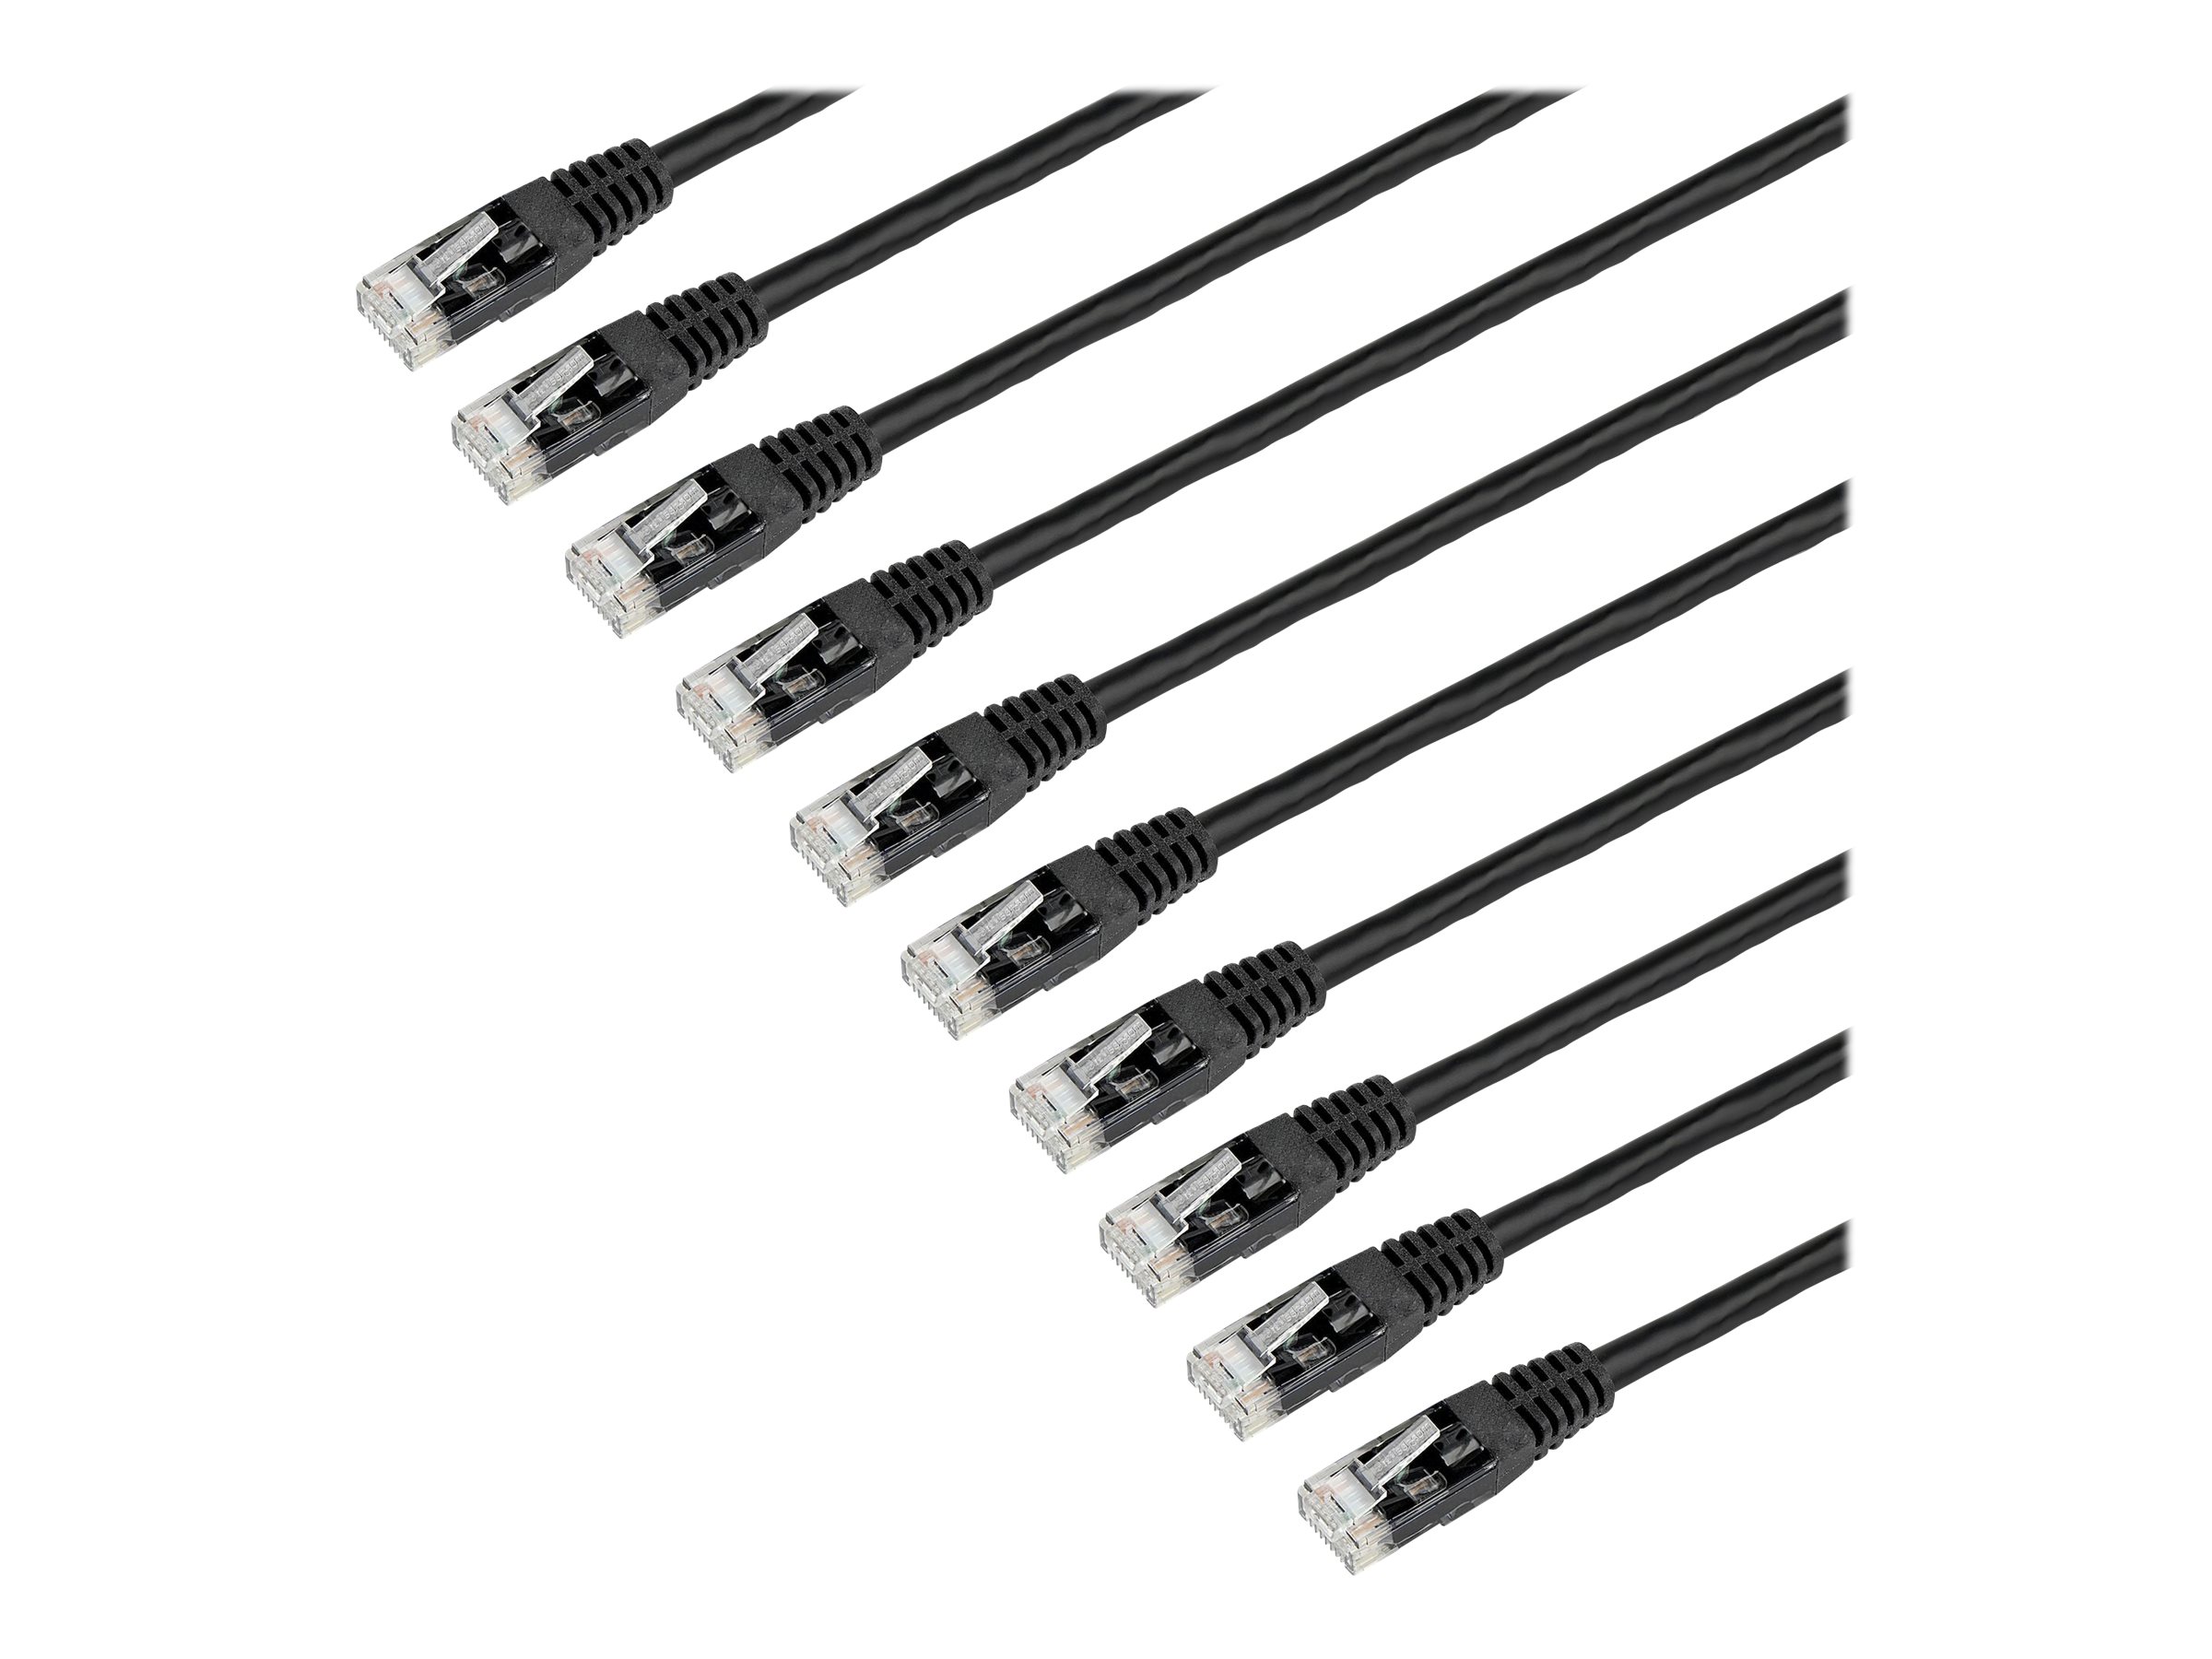 StarTech.com 6ft CAT6 Ethernet Cable, 10 Gigabit Molded RJ45 650MHz 100W PoE Patch Cord, CAT 6 10GbE UTP Network Cable with Strain Relief, Black, Fluke Tested/UL Certified Wiring, 10 Pack